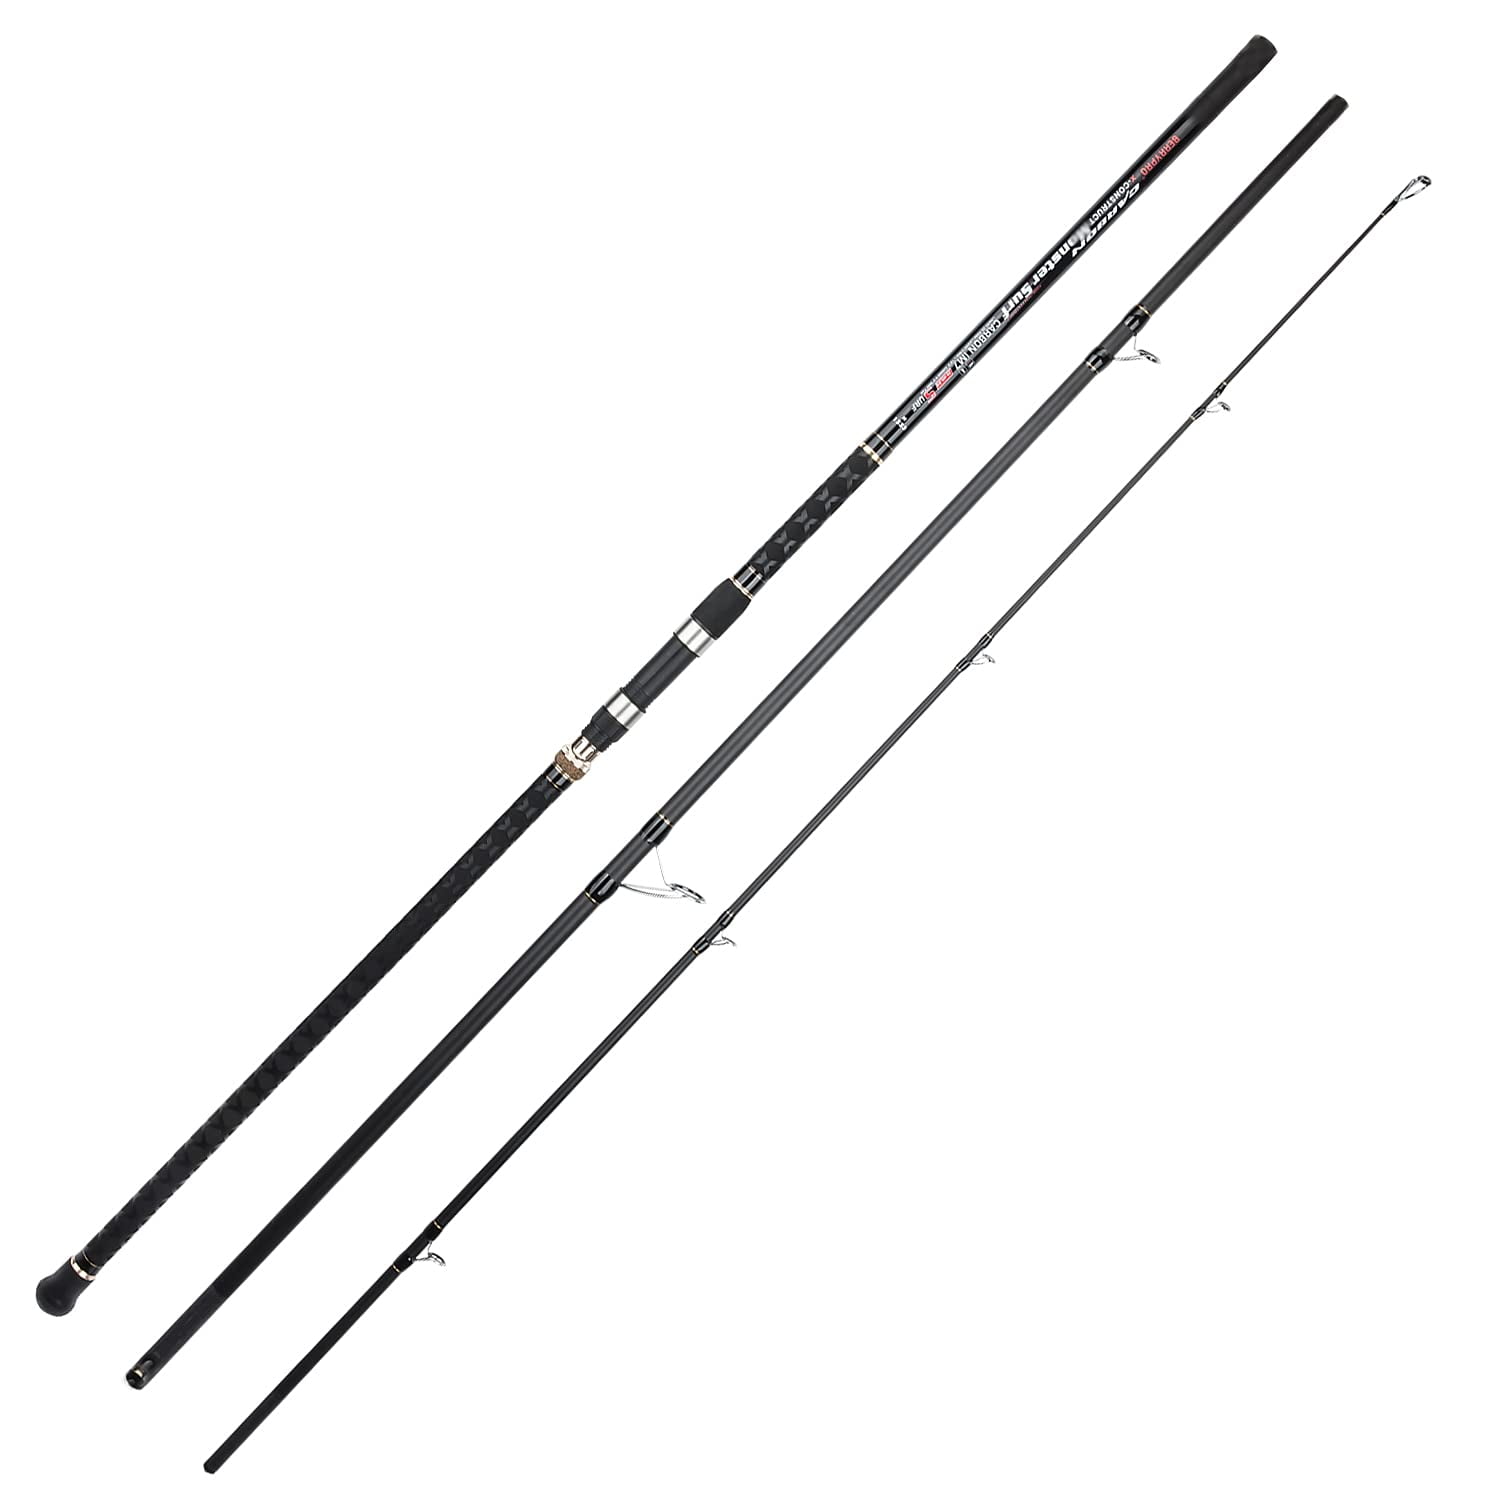 Berrypro Surf Spinning Fishing Rod Graphite Spinning Rod  (9'/10'/10'6''/11'/12'/13'3'')13'3''-Spinning-3pc 